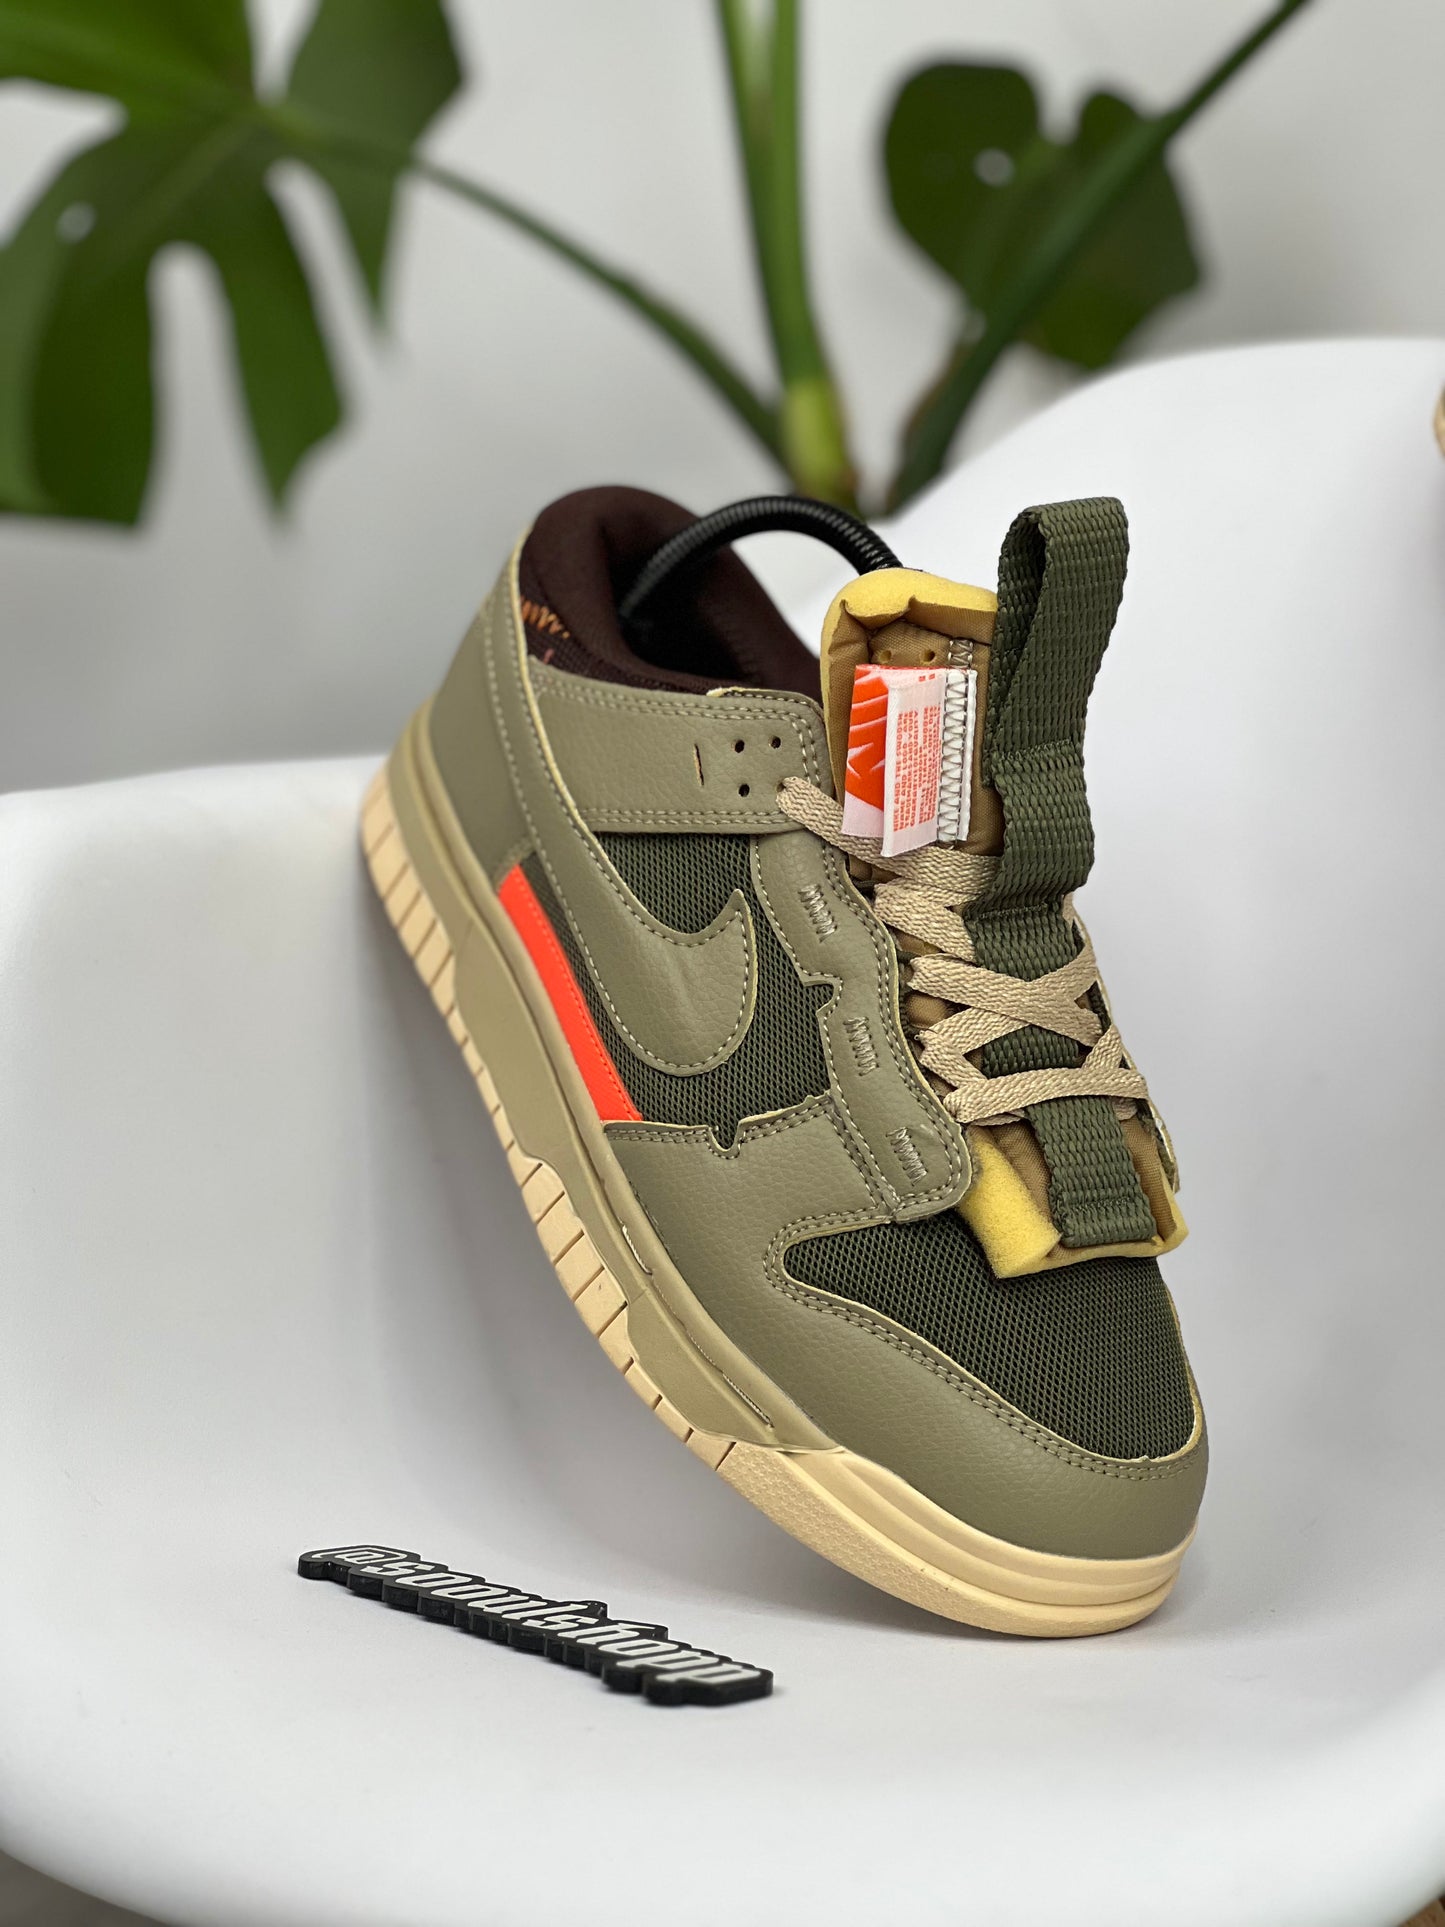 Nike Dunk Low "Remastered Olive"